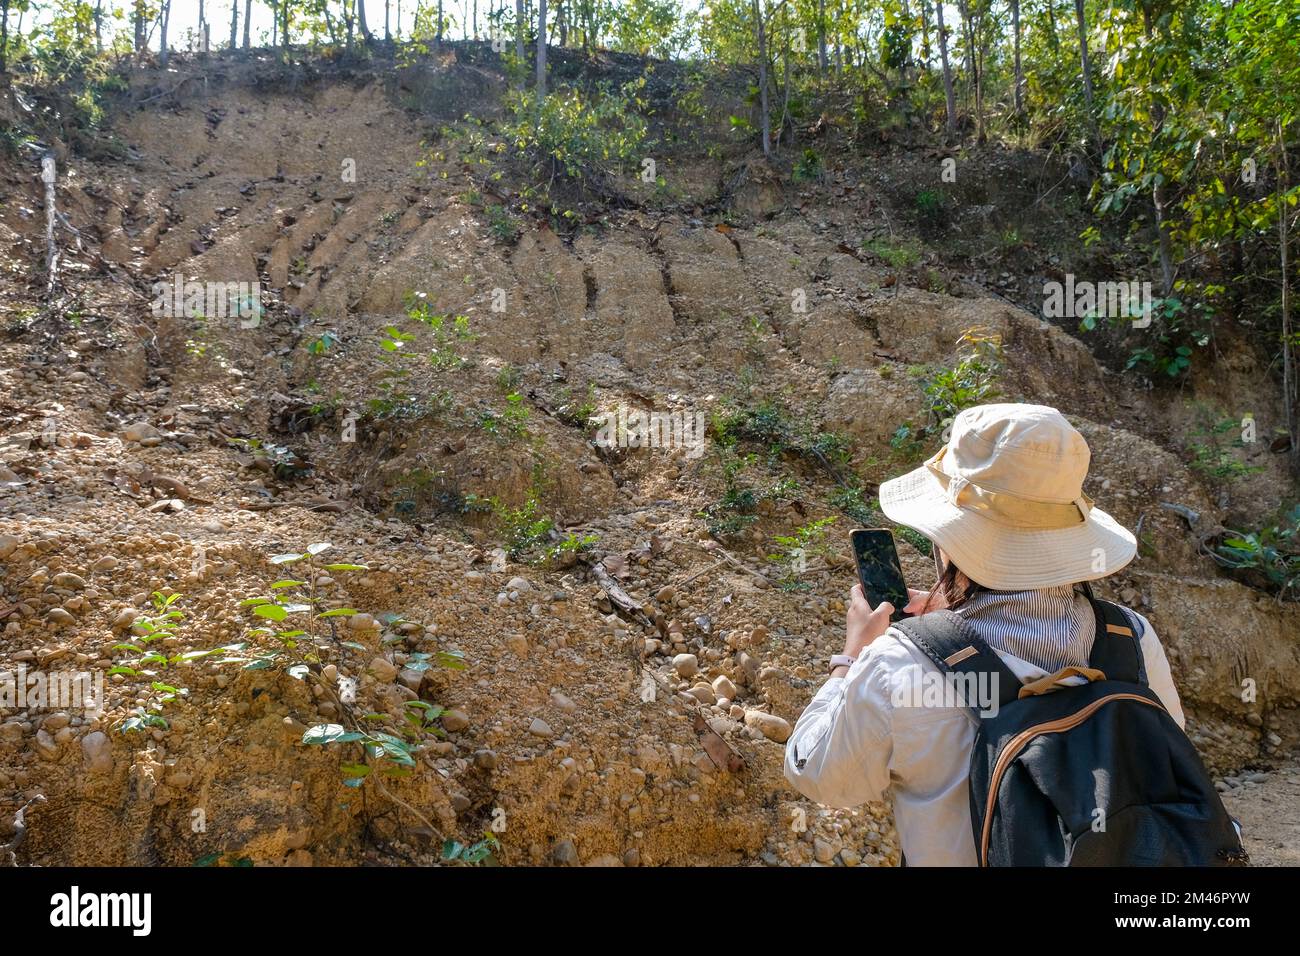 Female geologist using mobile phone inspecting nature, analyzing rocks or pebbles. Researchers collect samples of biological materials. Environmental Stock Photo